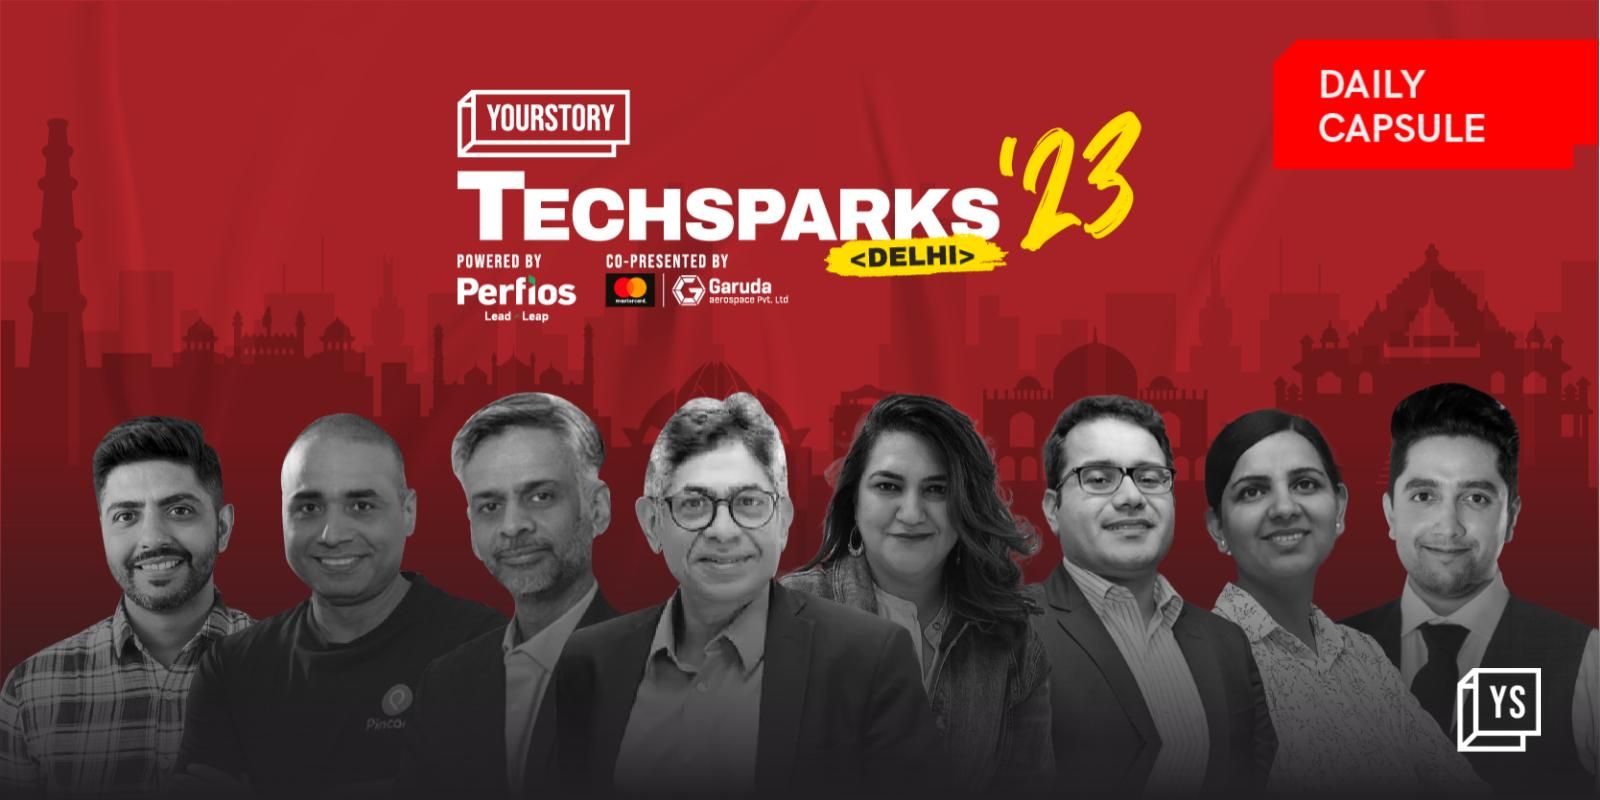 Are you ready for TechSparks Delhi? Inside upGrad’s H1 report